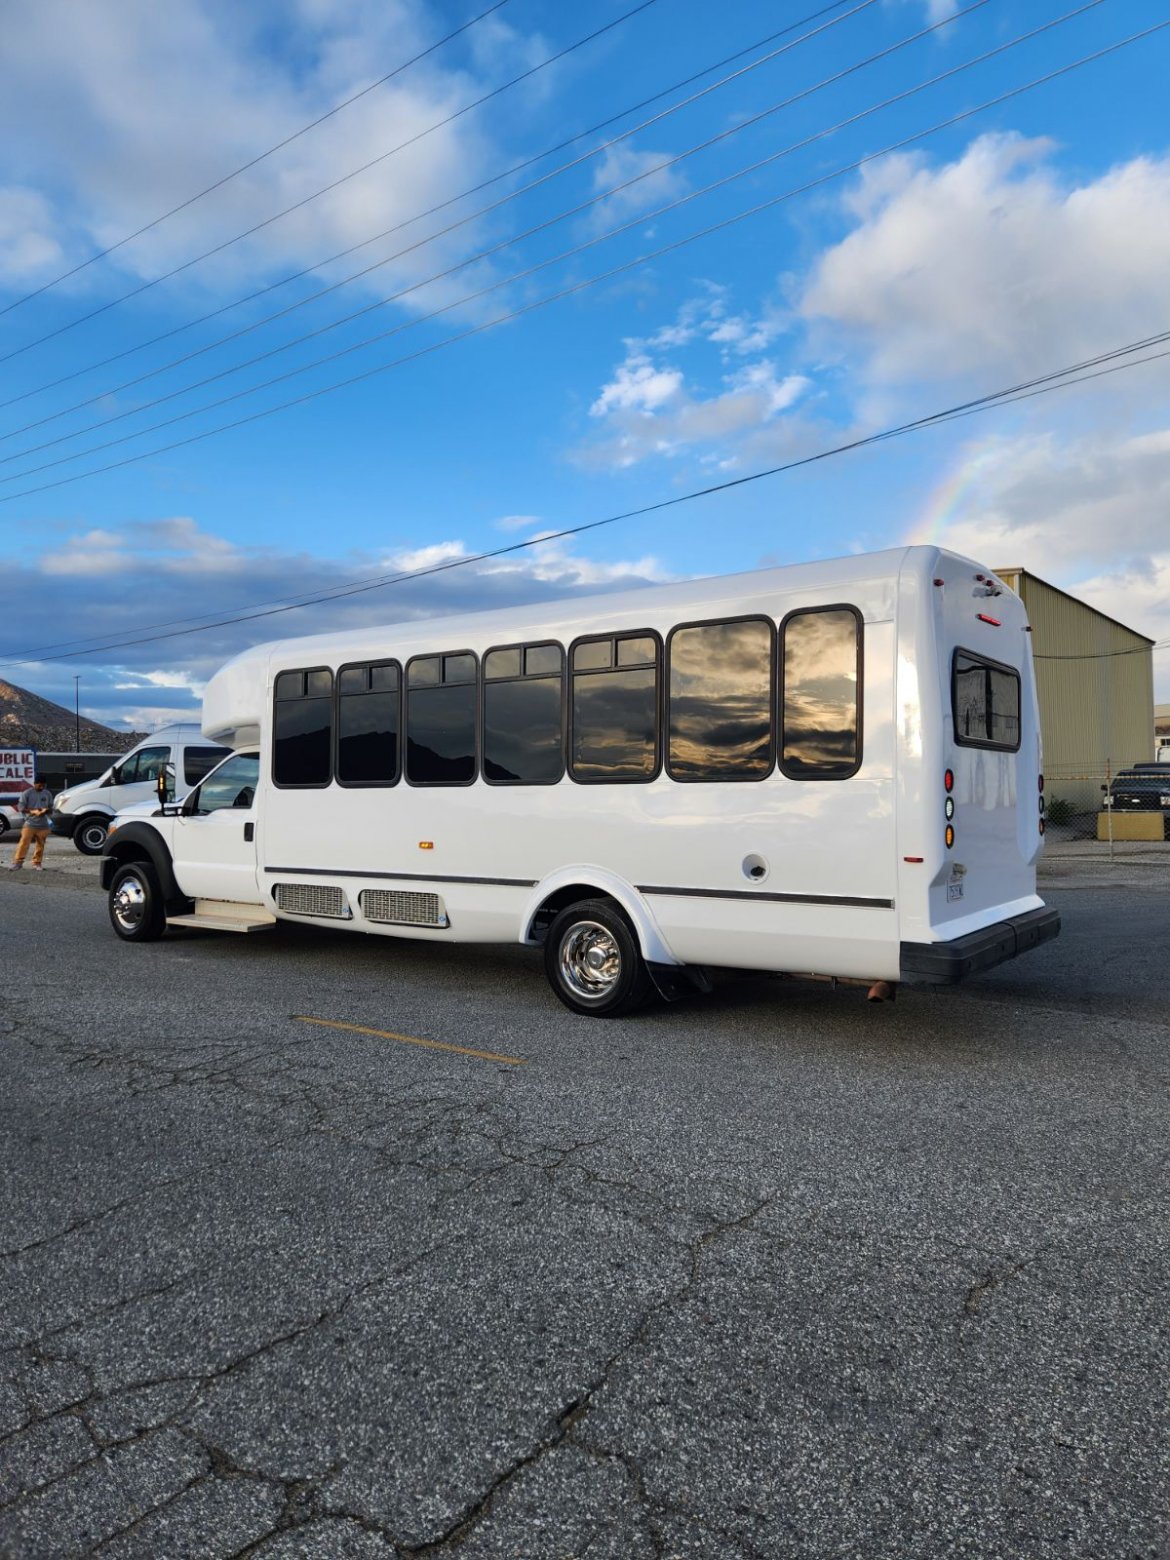 Limo Bus for sale: 2015 Ford F550